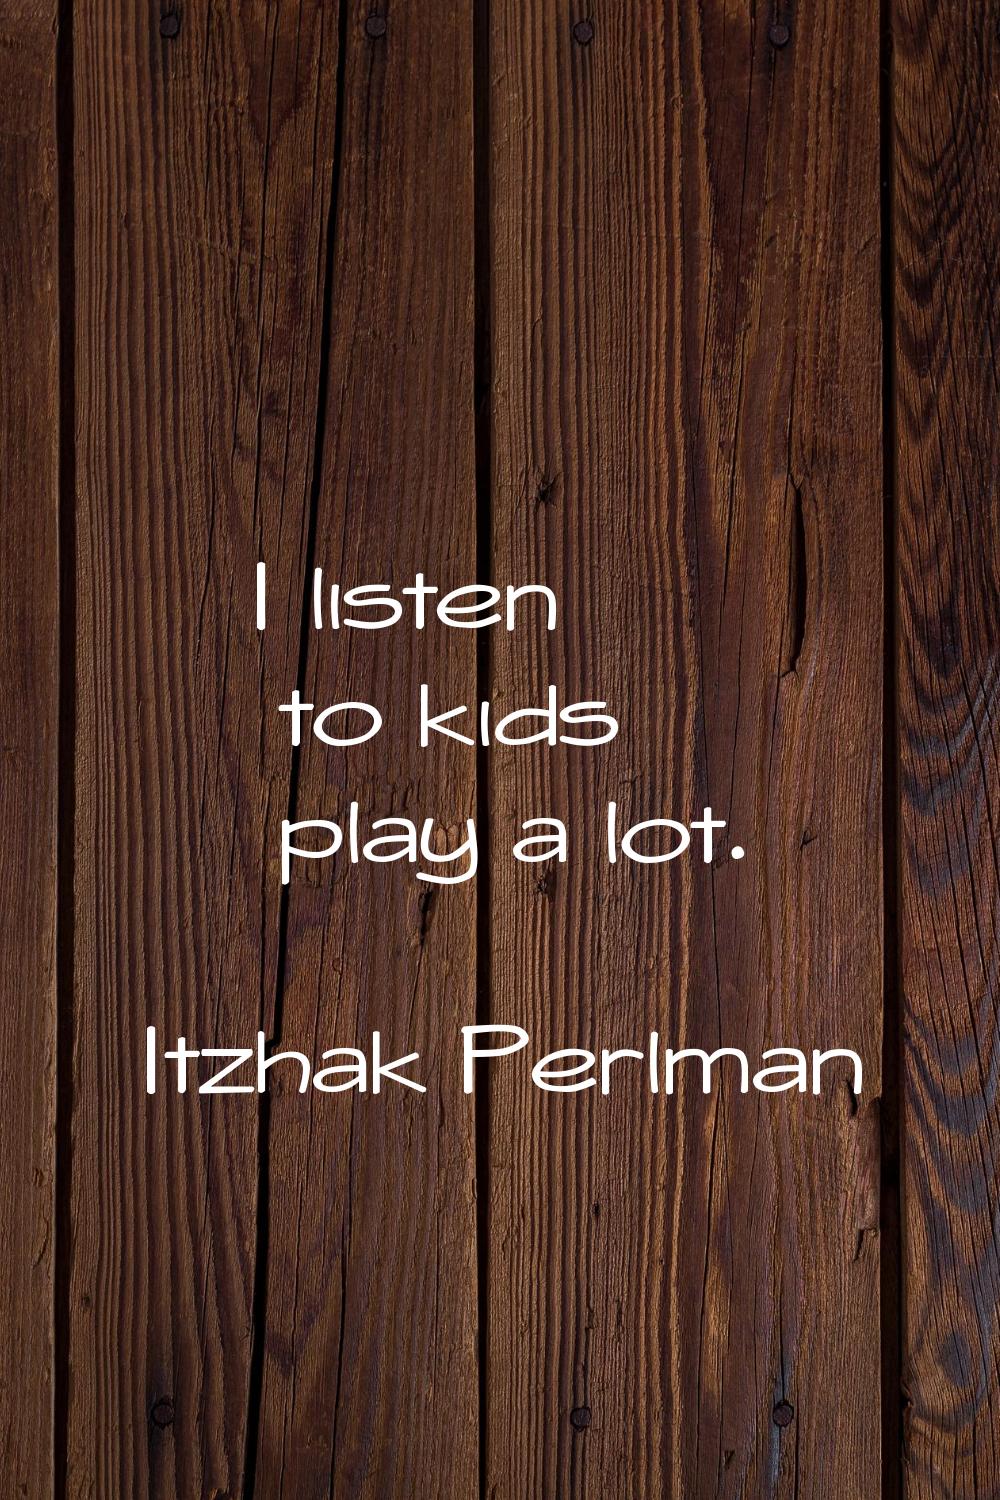 I listen to kids play a lot.